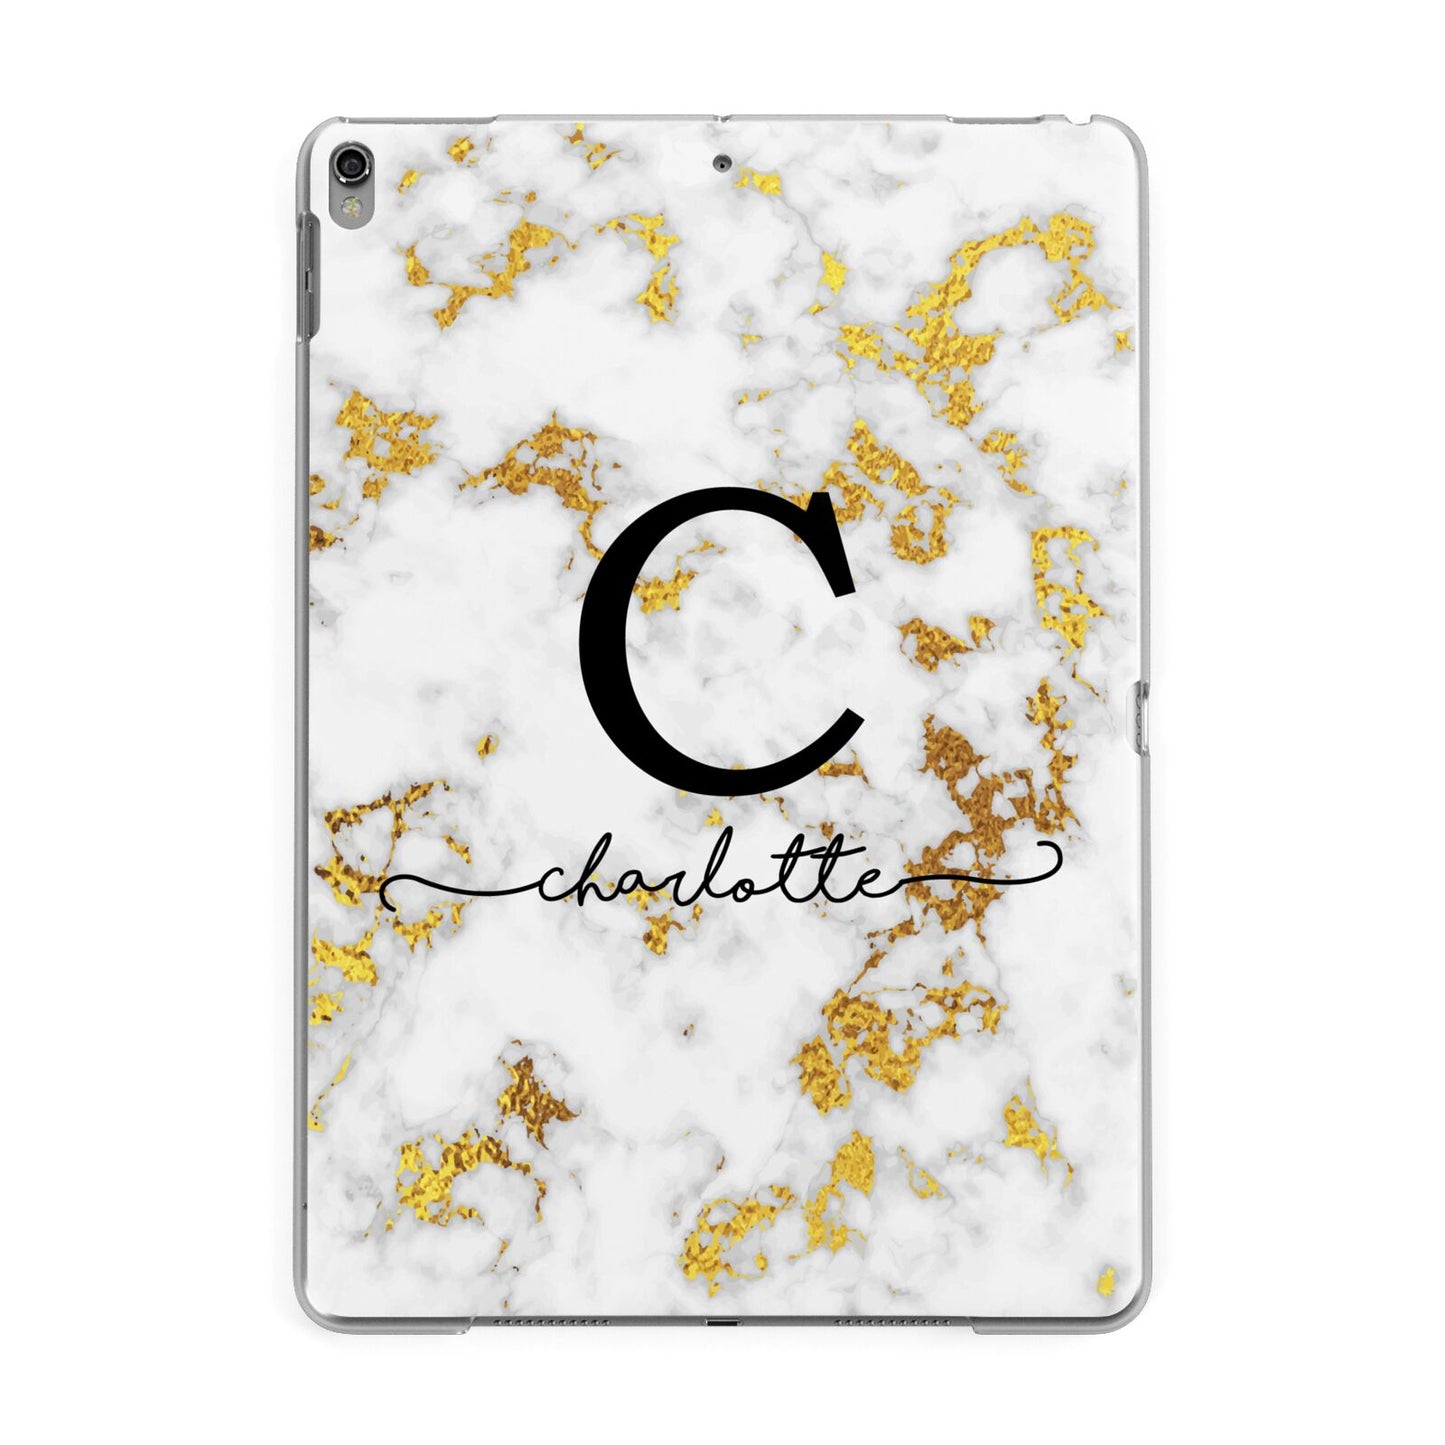 Initialled White Gold Marble with Name Apple iPad Grey Case